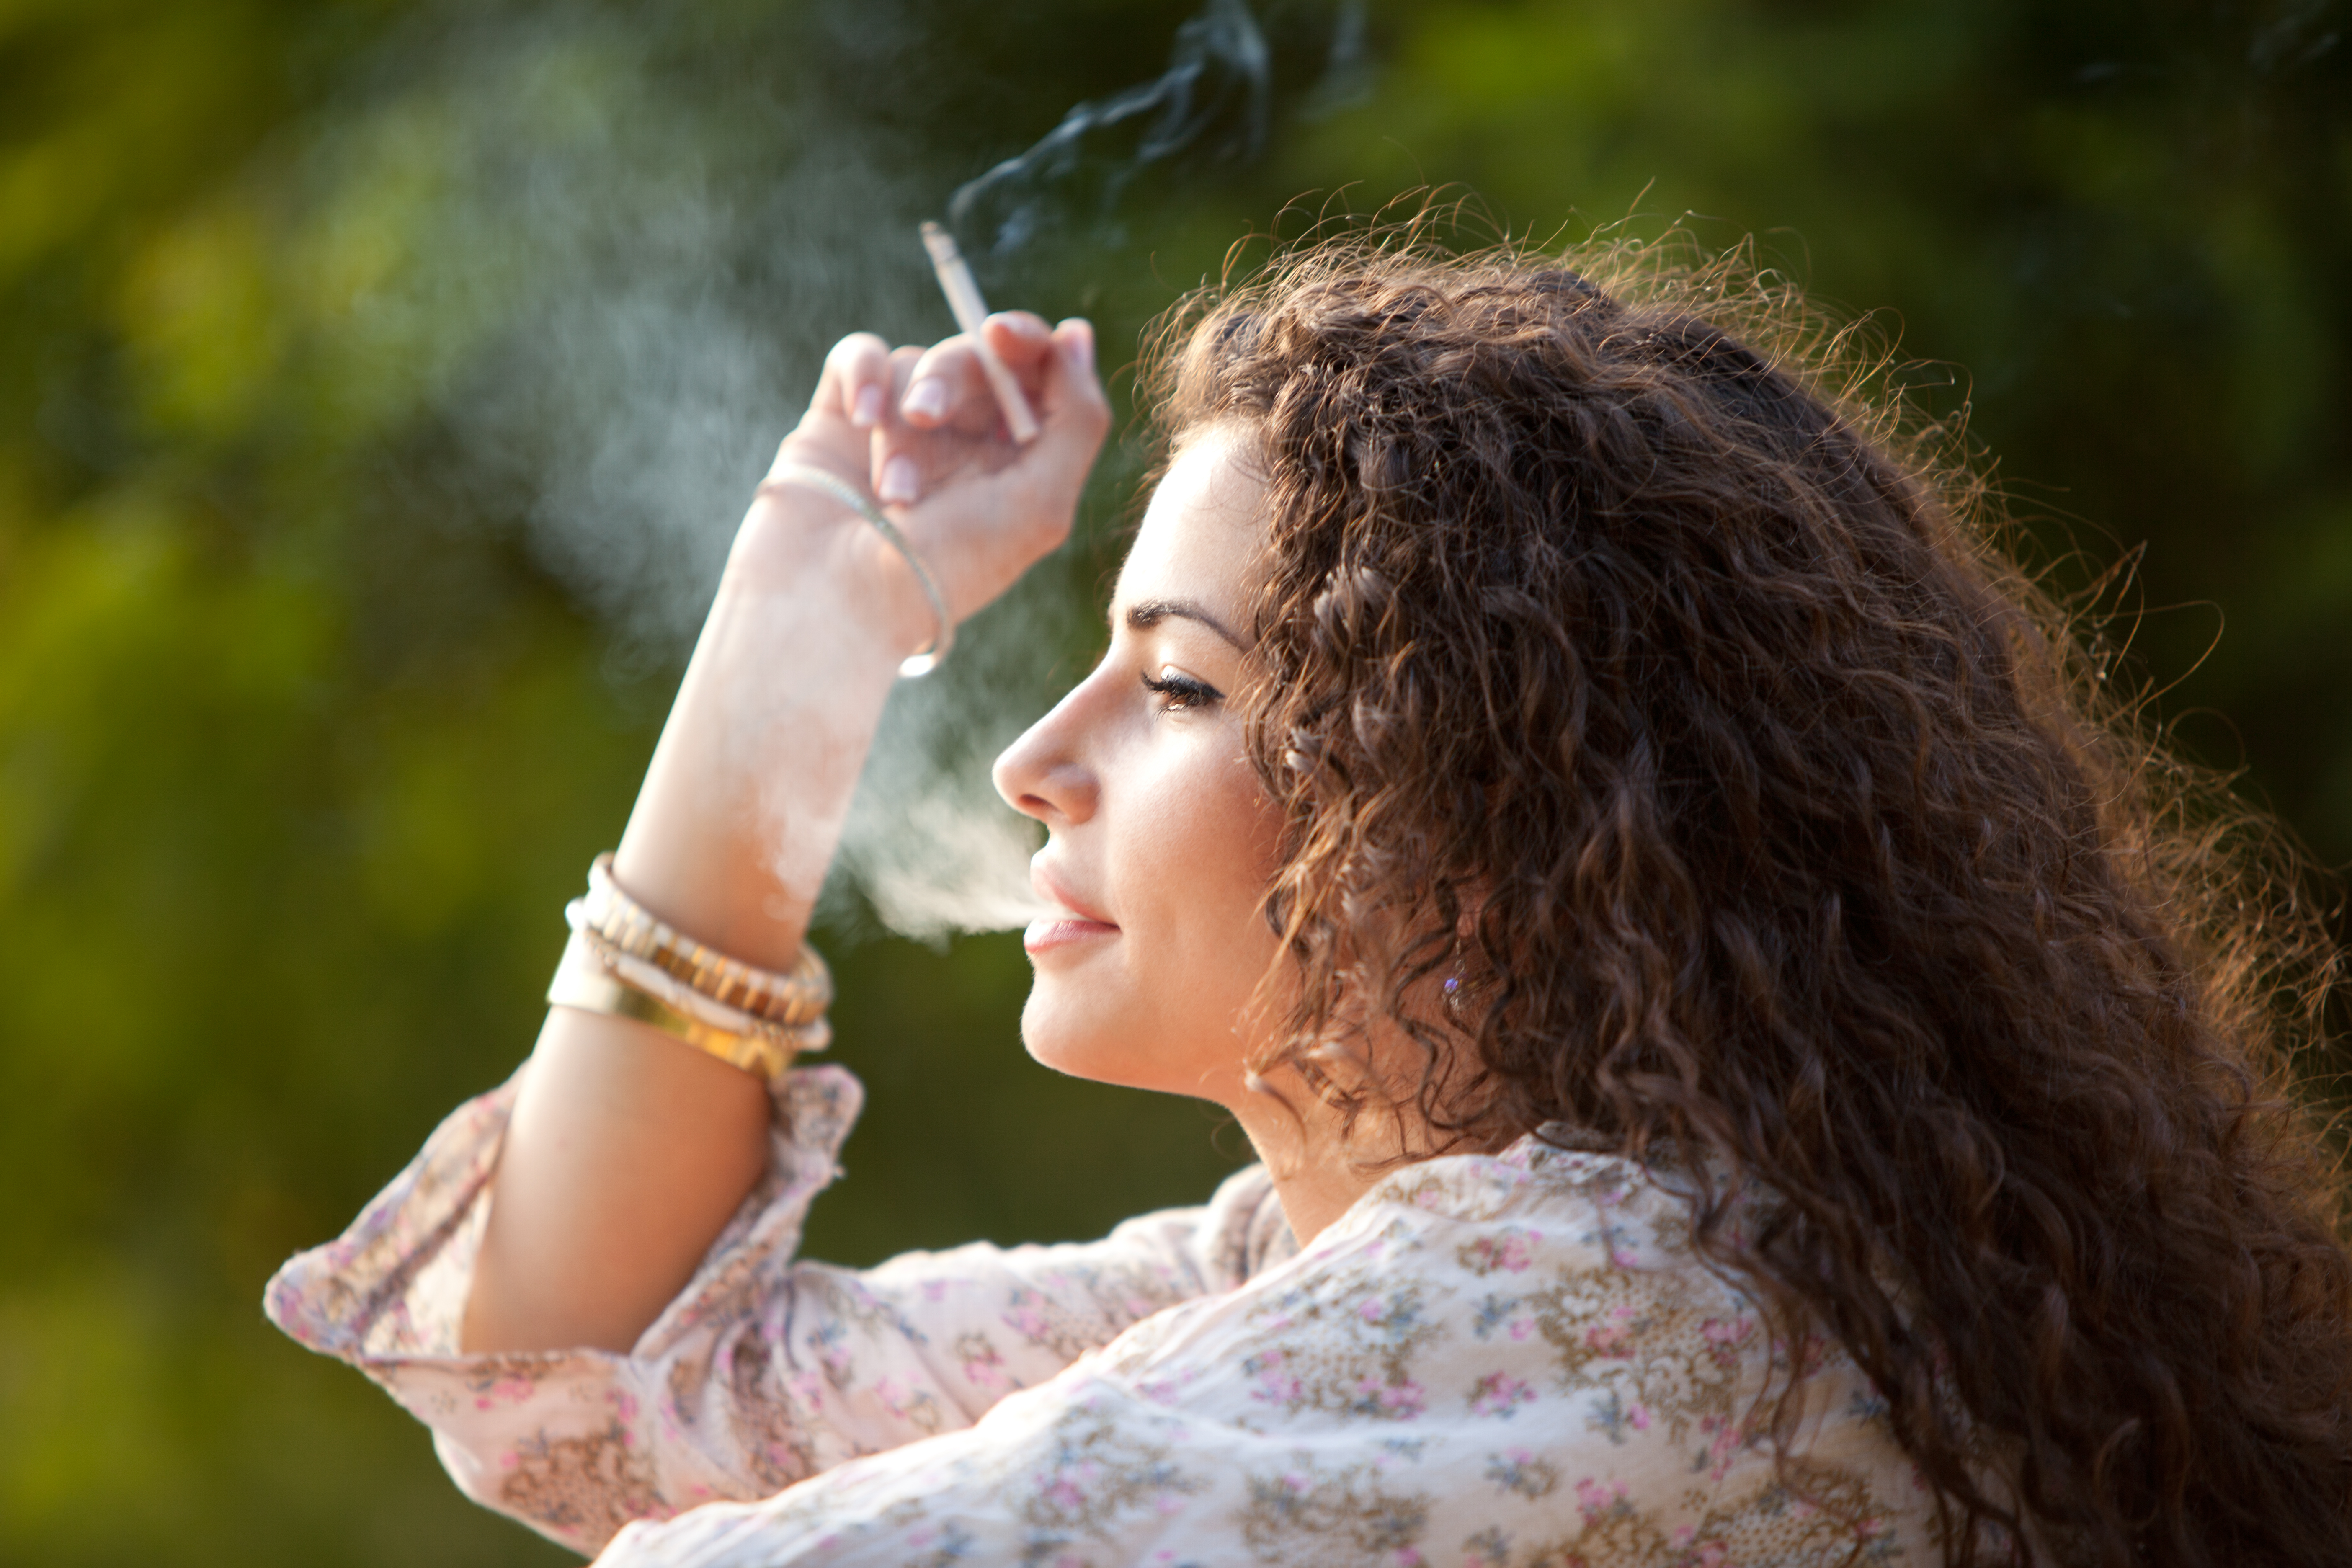 A young woman smoking outside. Breast cancer research has identified that tabacco is one of the top contibutors. Advances like this allow us to change our lifestyle and lower our risk of developing breast cancer.